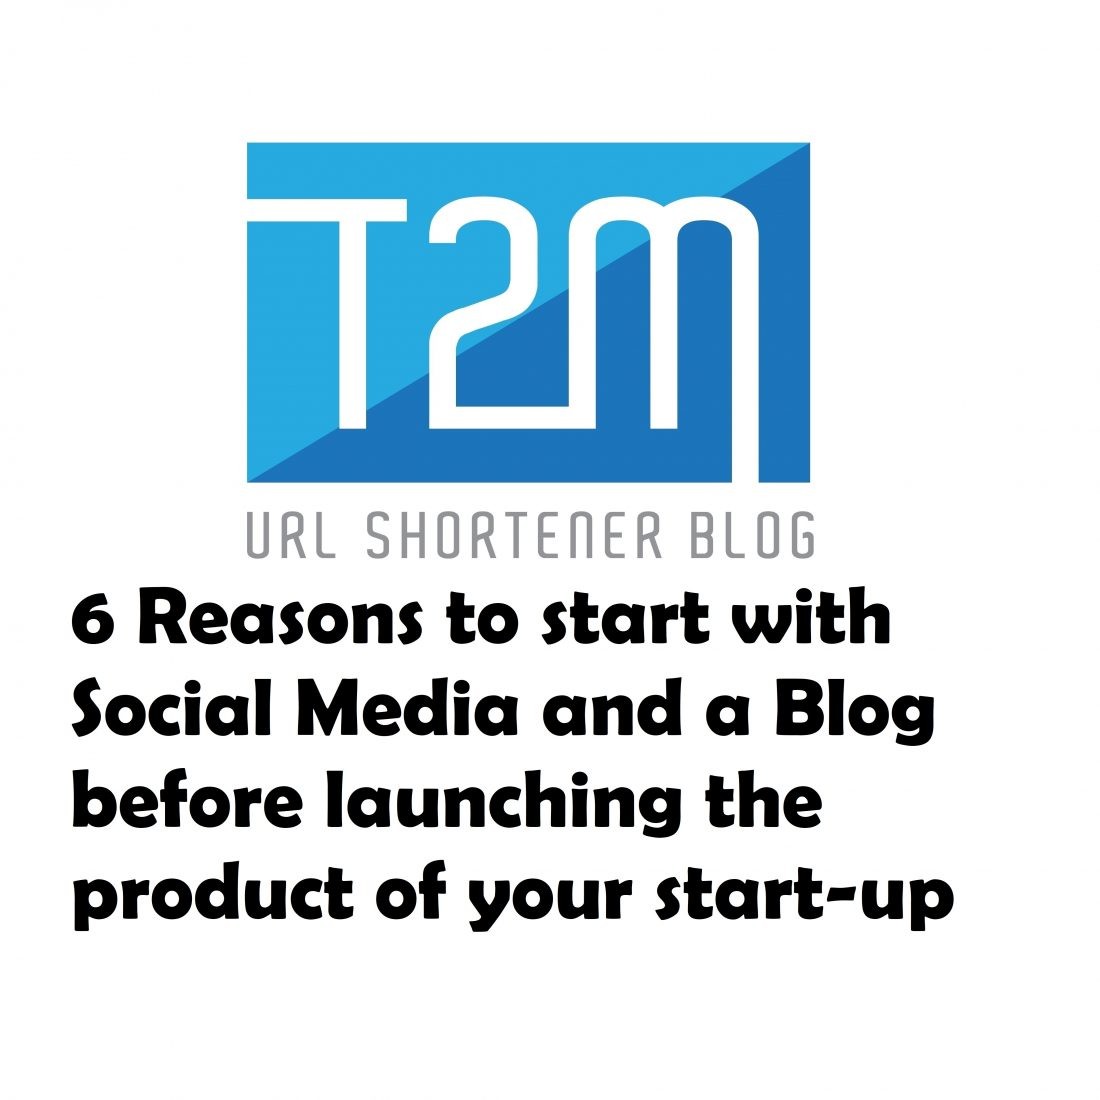 6 Reasons to start with Social Media and a Blog before launching the product of your start-up